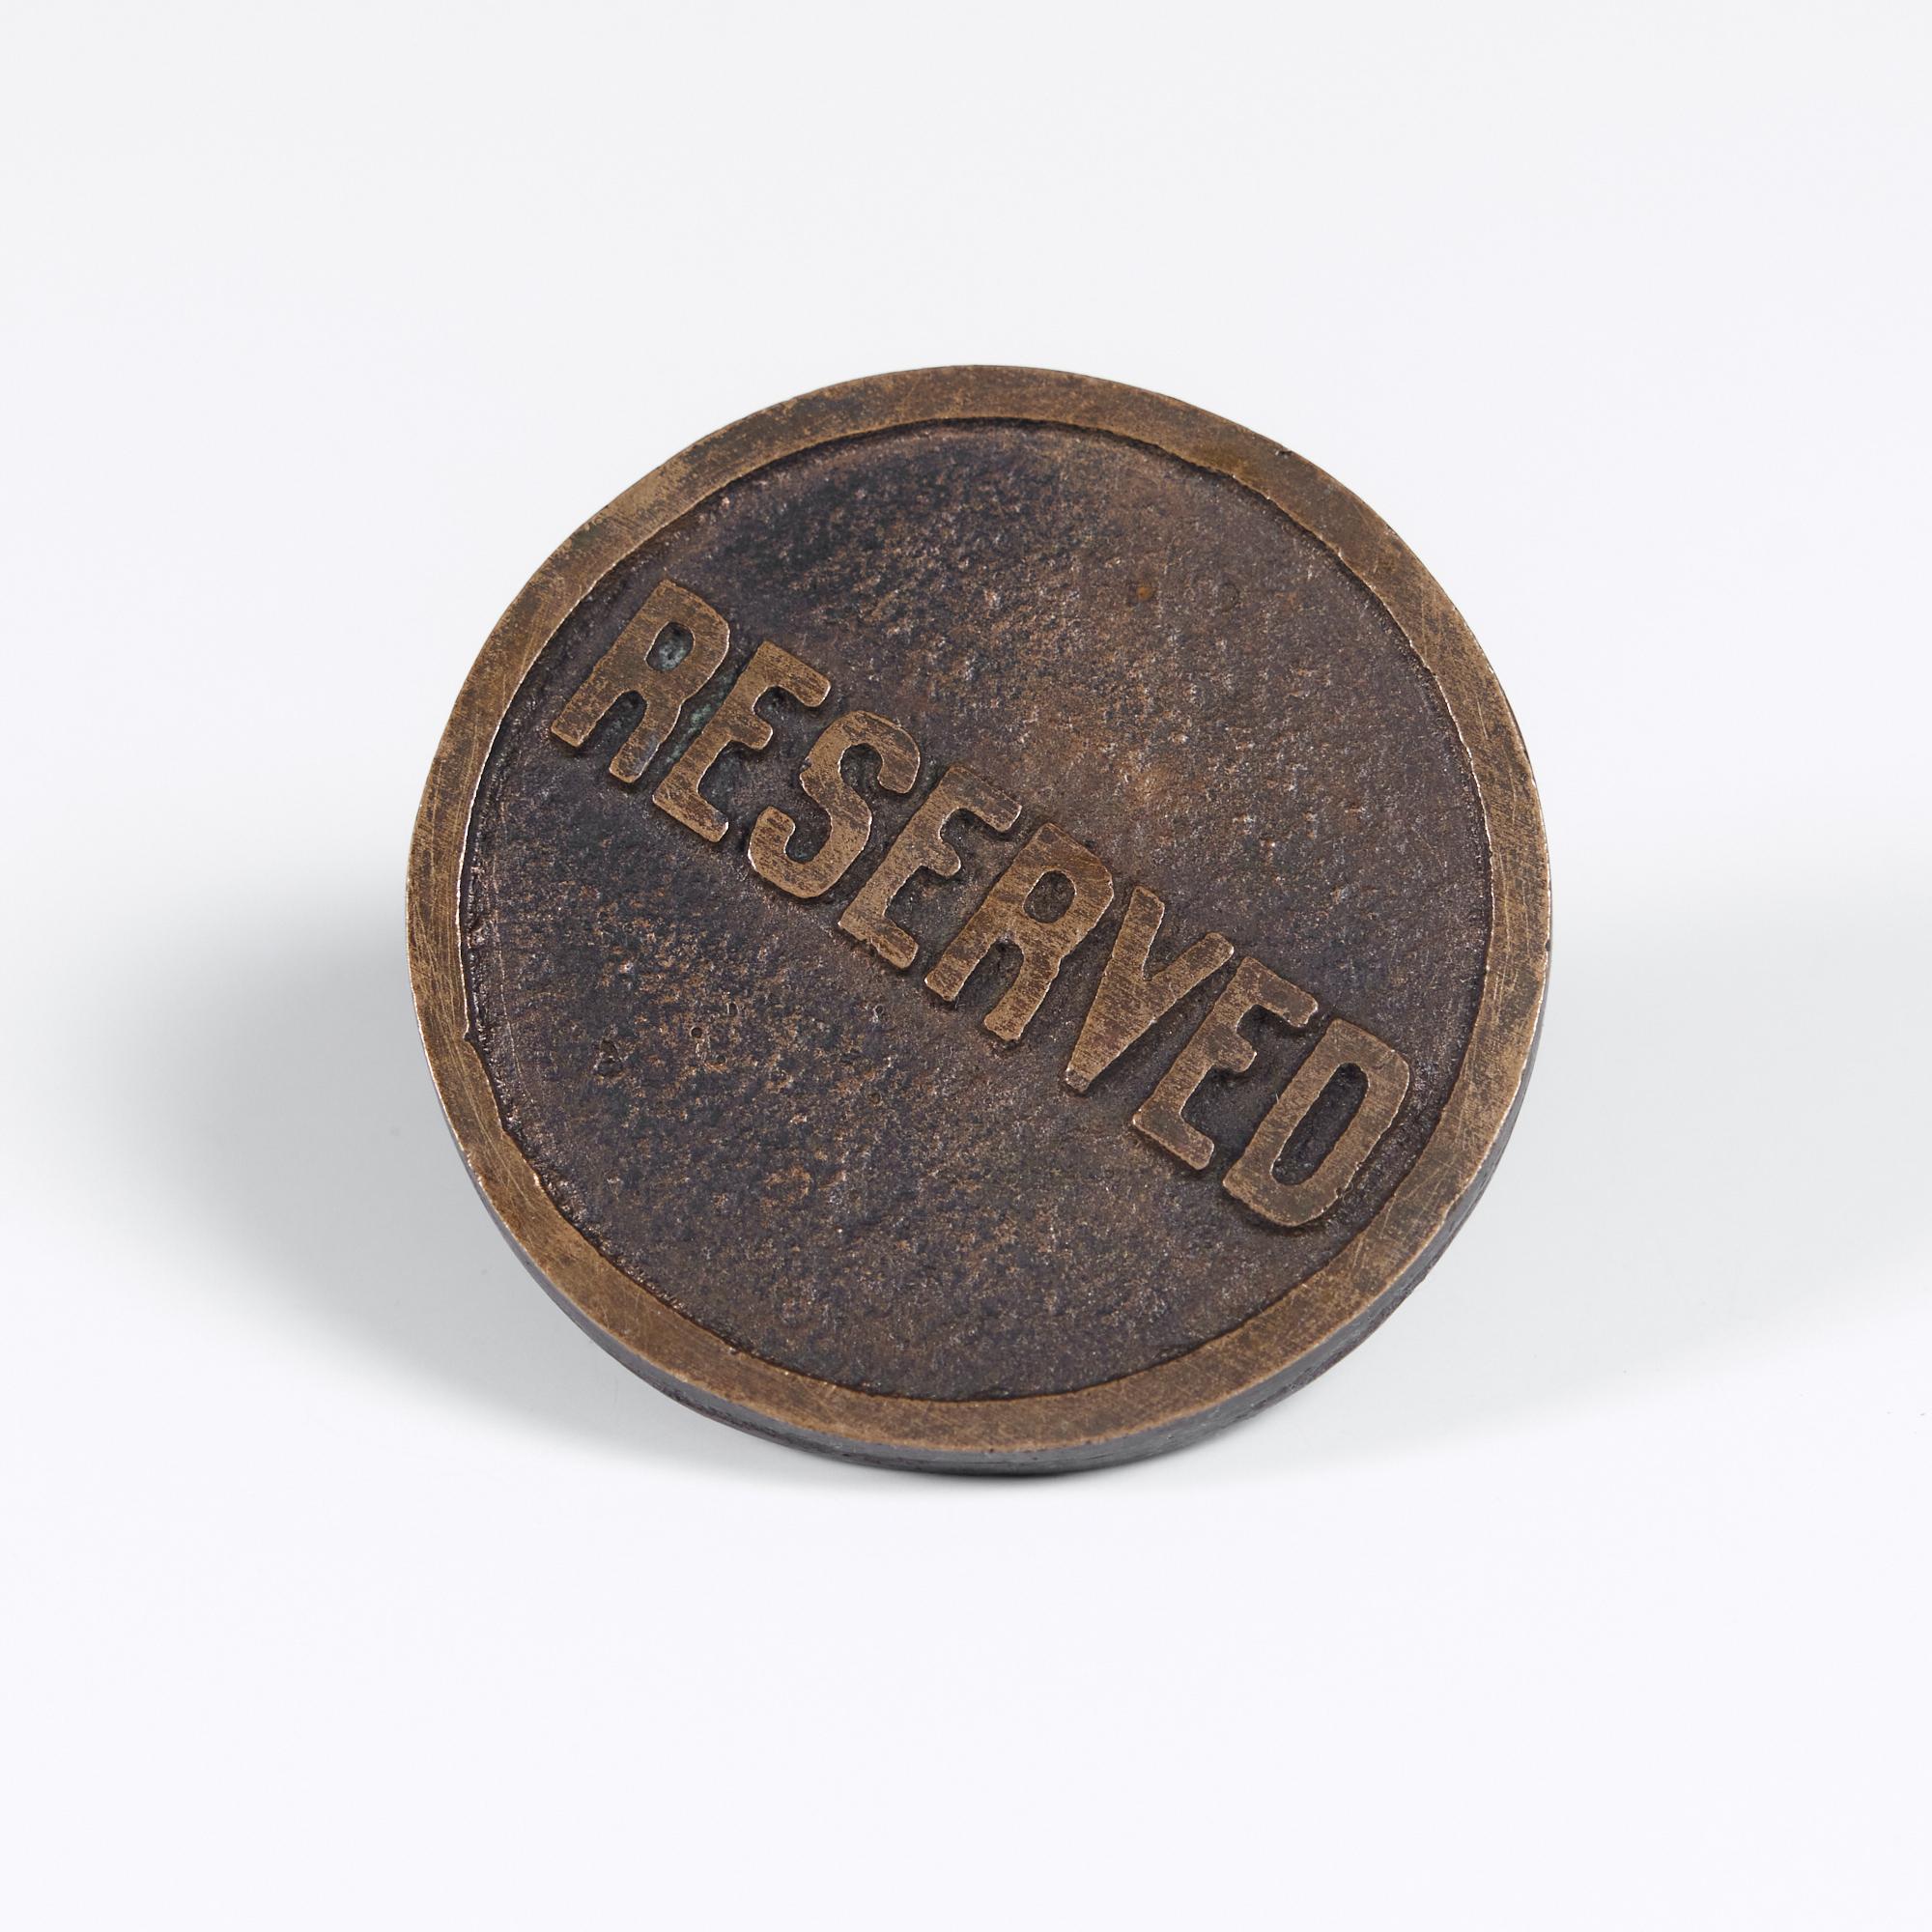 Brass decorative object or paperweight. This brass button showcases a round face with embossed 